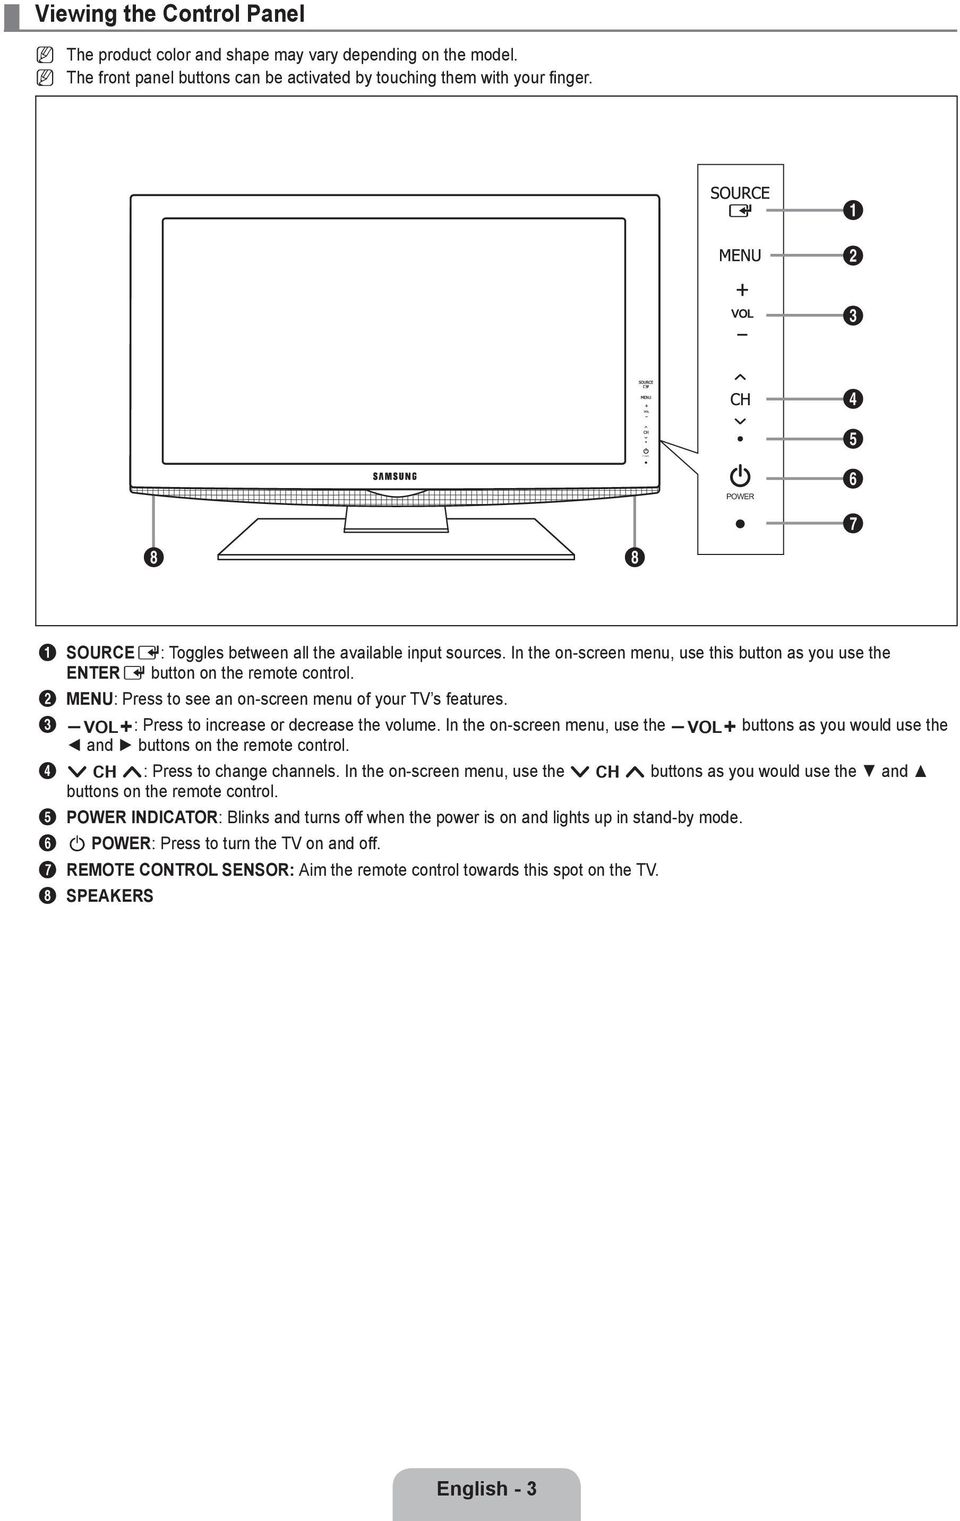 2 MEU: Press to see an on-screen menu of your TV s features. 3 y: Press to increase or decrease the volume.